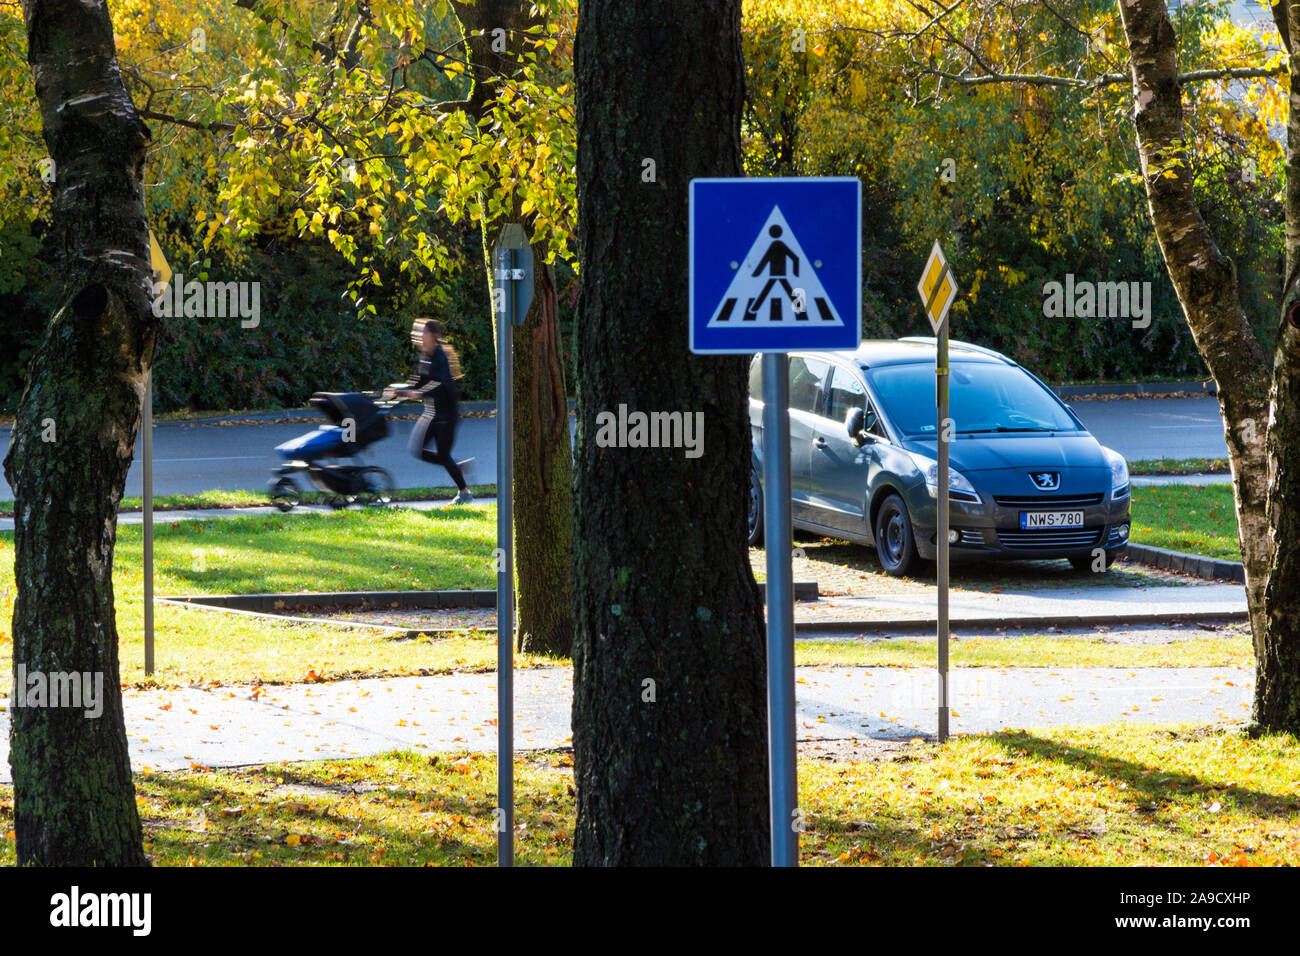 Running jogging young woman pushing pram beside car and traffic signs near traffic training course park, Sopron, Hungary Stock Photo